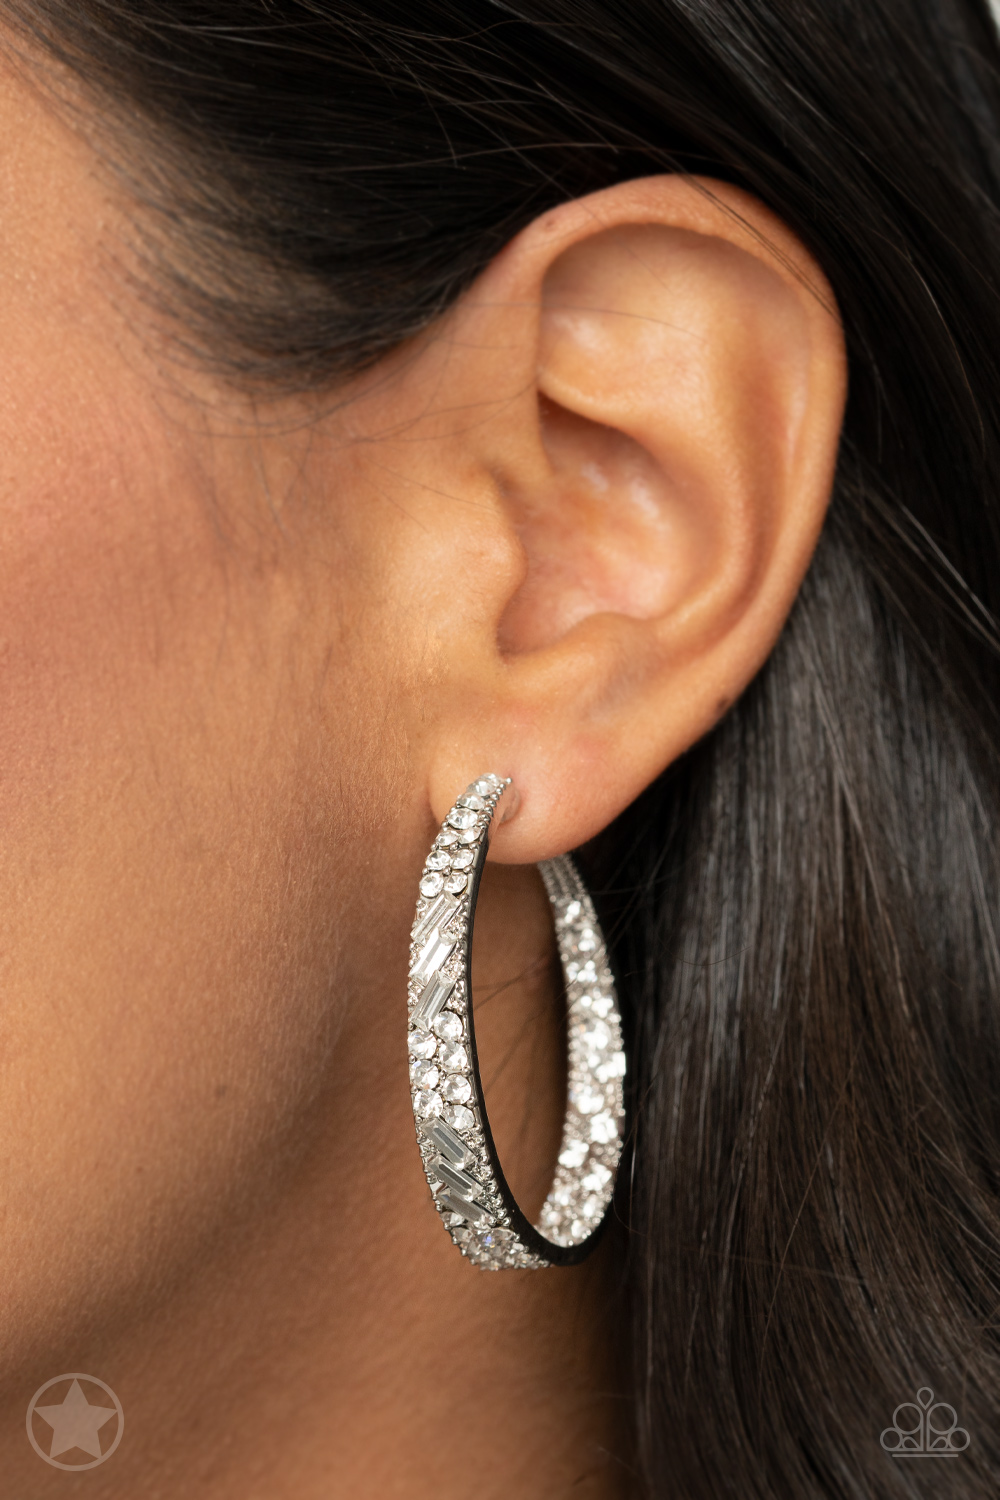 #286 GLITZY By Association - Paparazzi Accessories Earrings